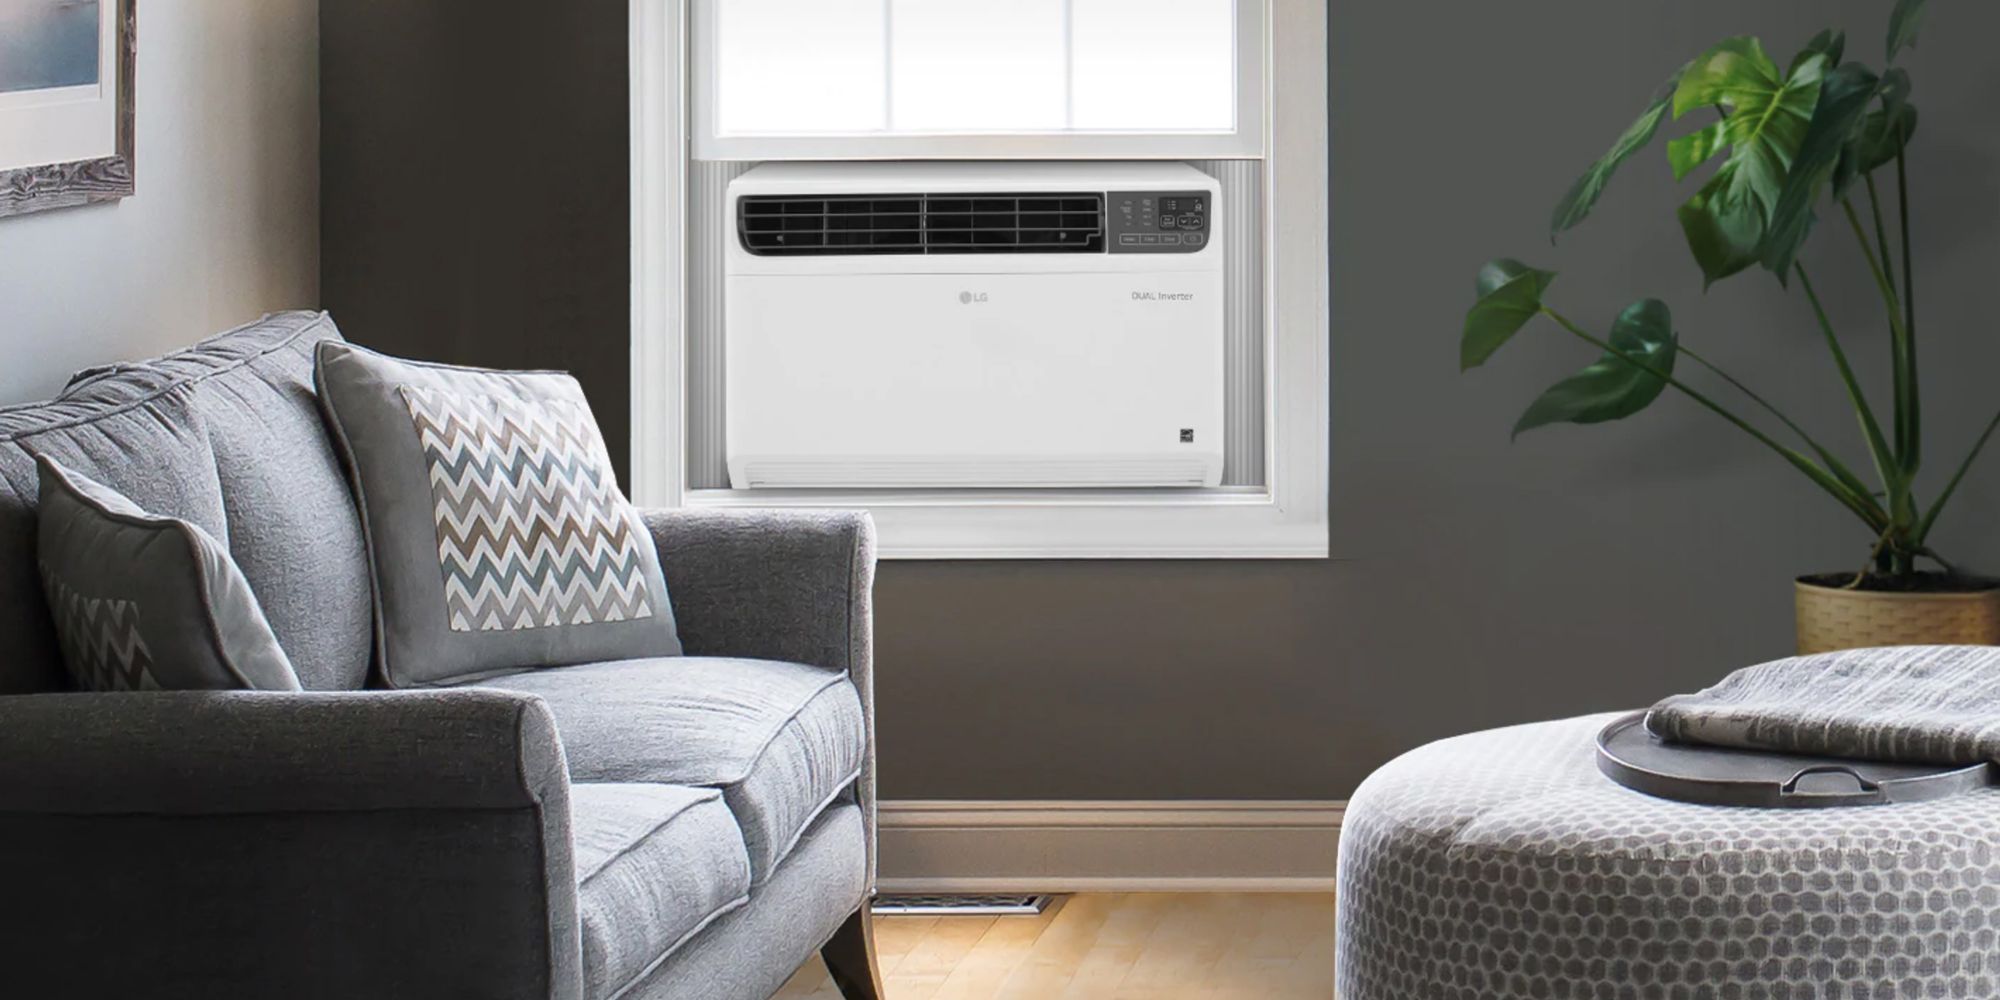 smart wall air conditioner